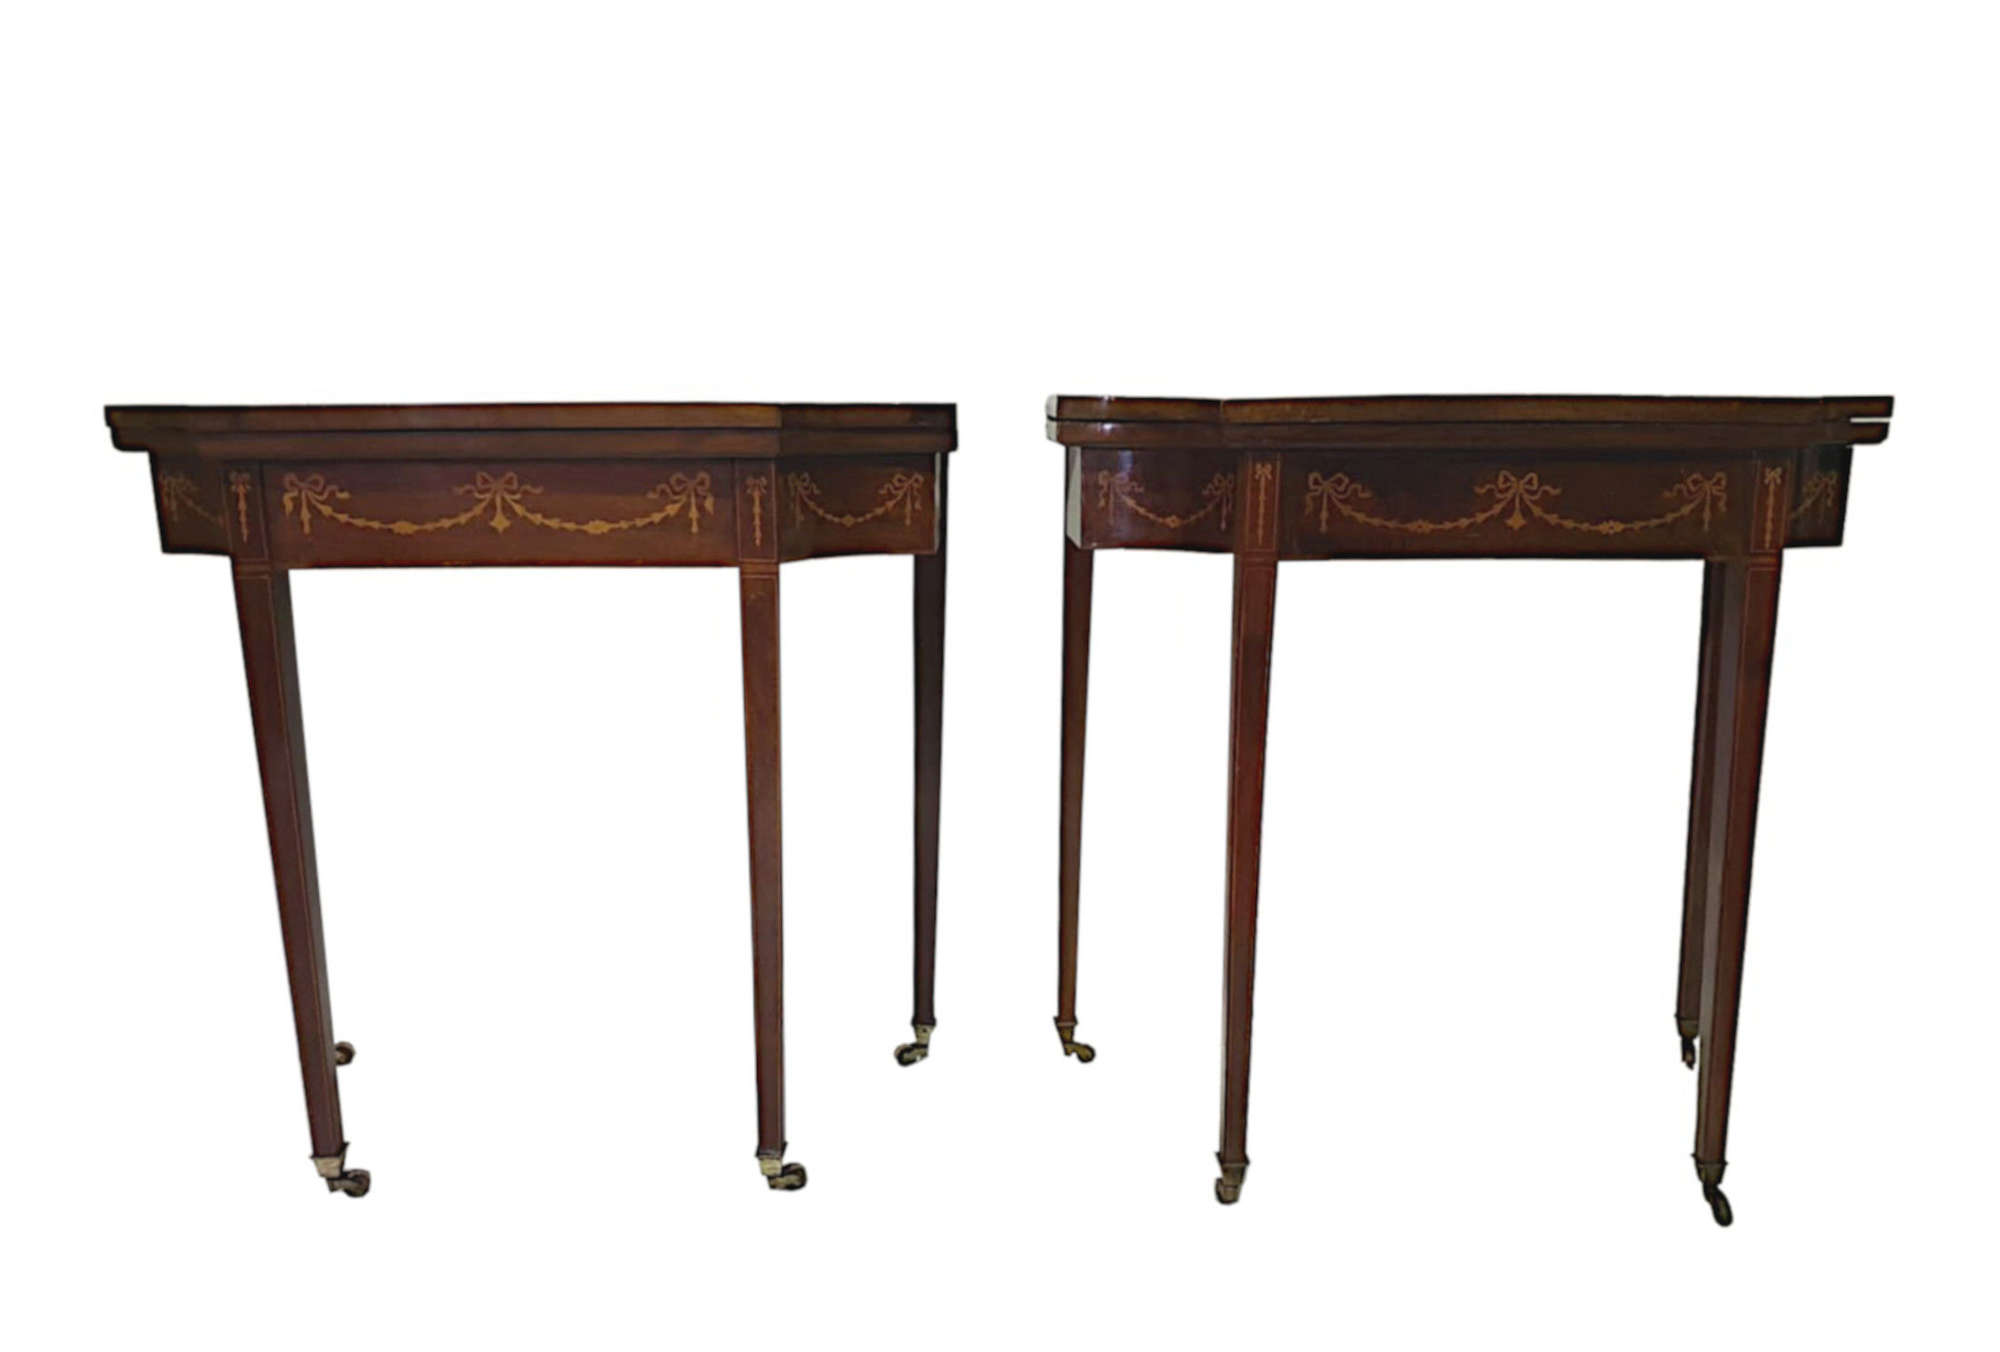 A Very Rare And Fine Pair Of 19th Century Inlaid Card Tables